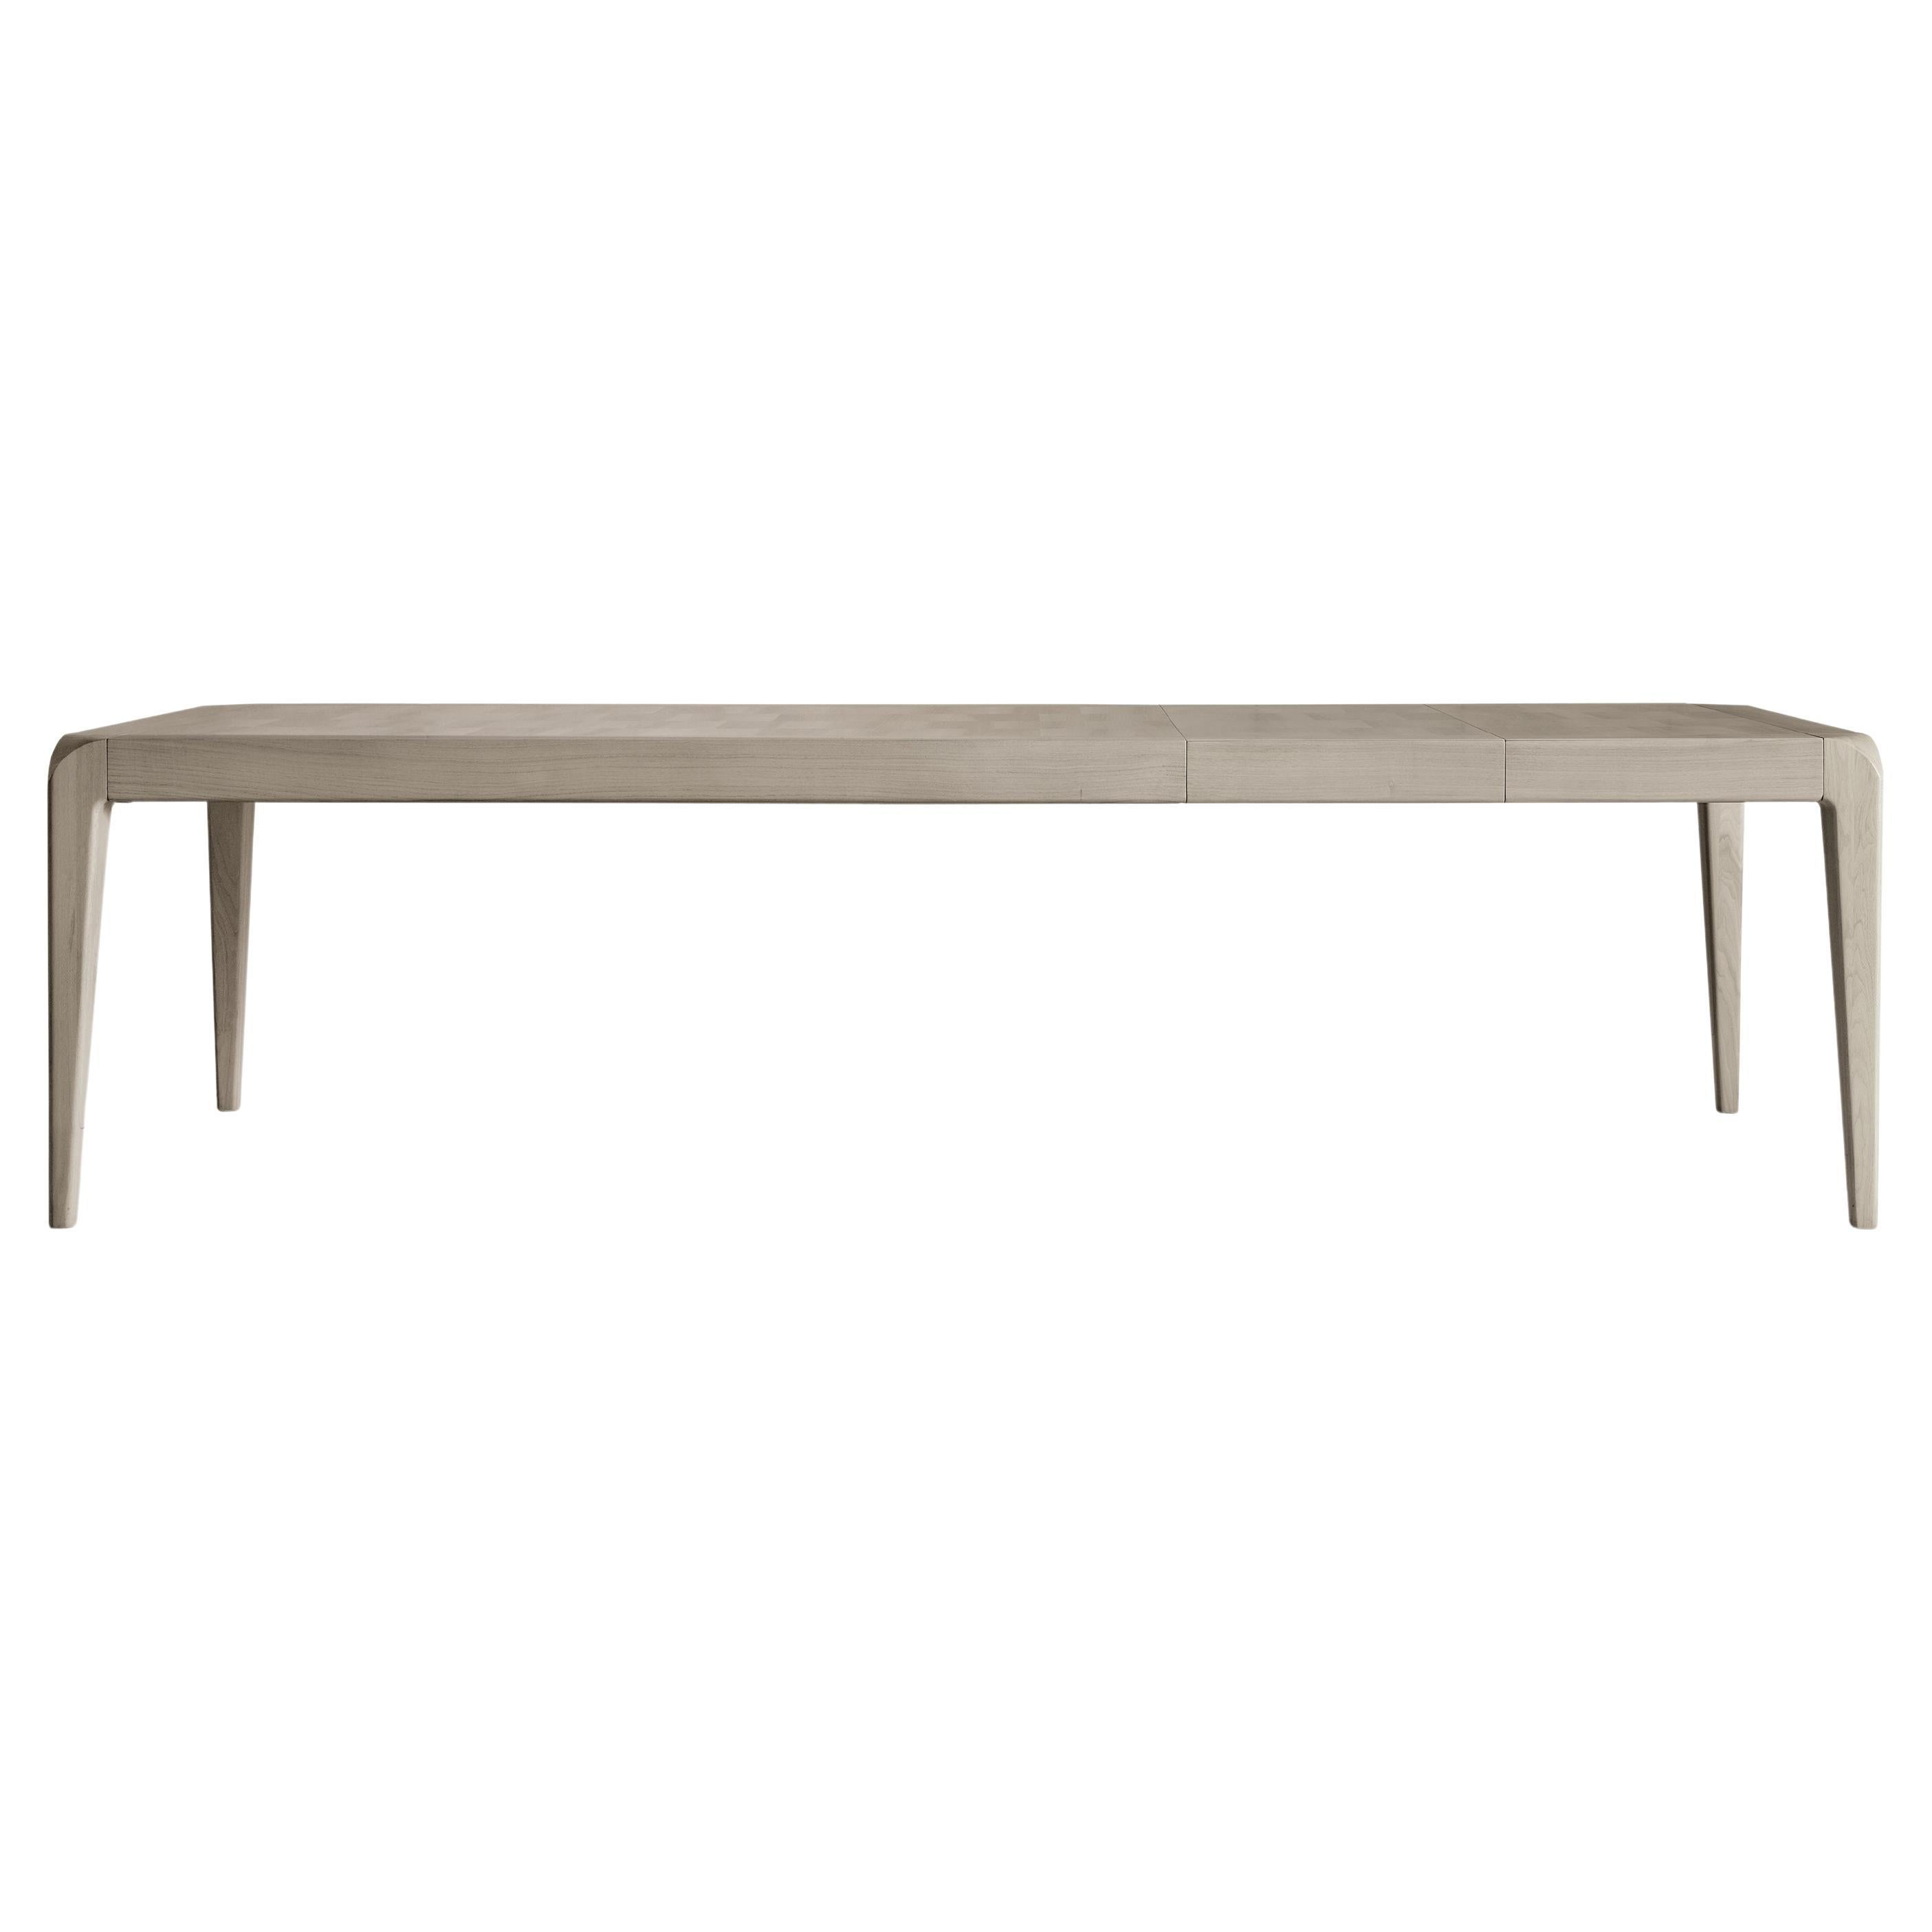 The Sentiero extendable table in solid wood is the expression of contemporary design and high quality Italian craftsmanship. Rectangular in shape, it features structure and legs in precious gray or natural walnut with inlay and wood finish. The